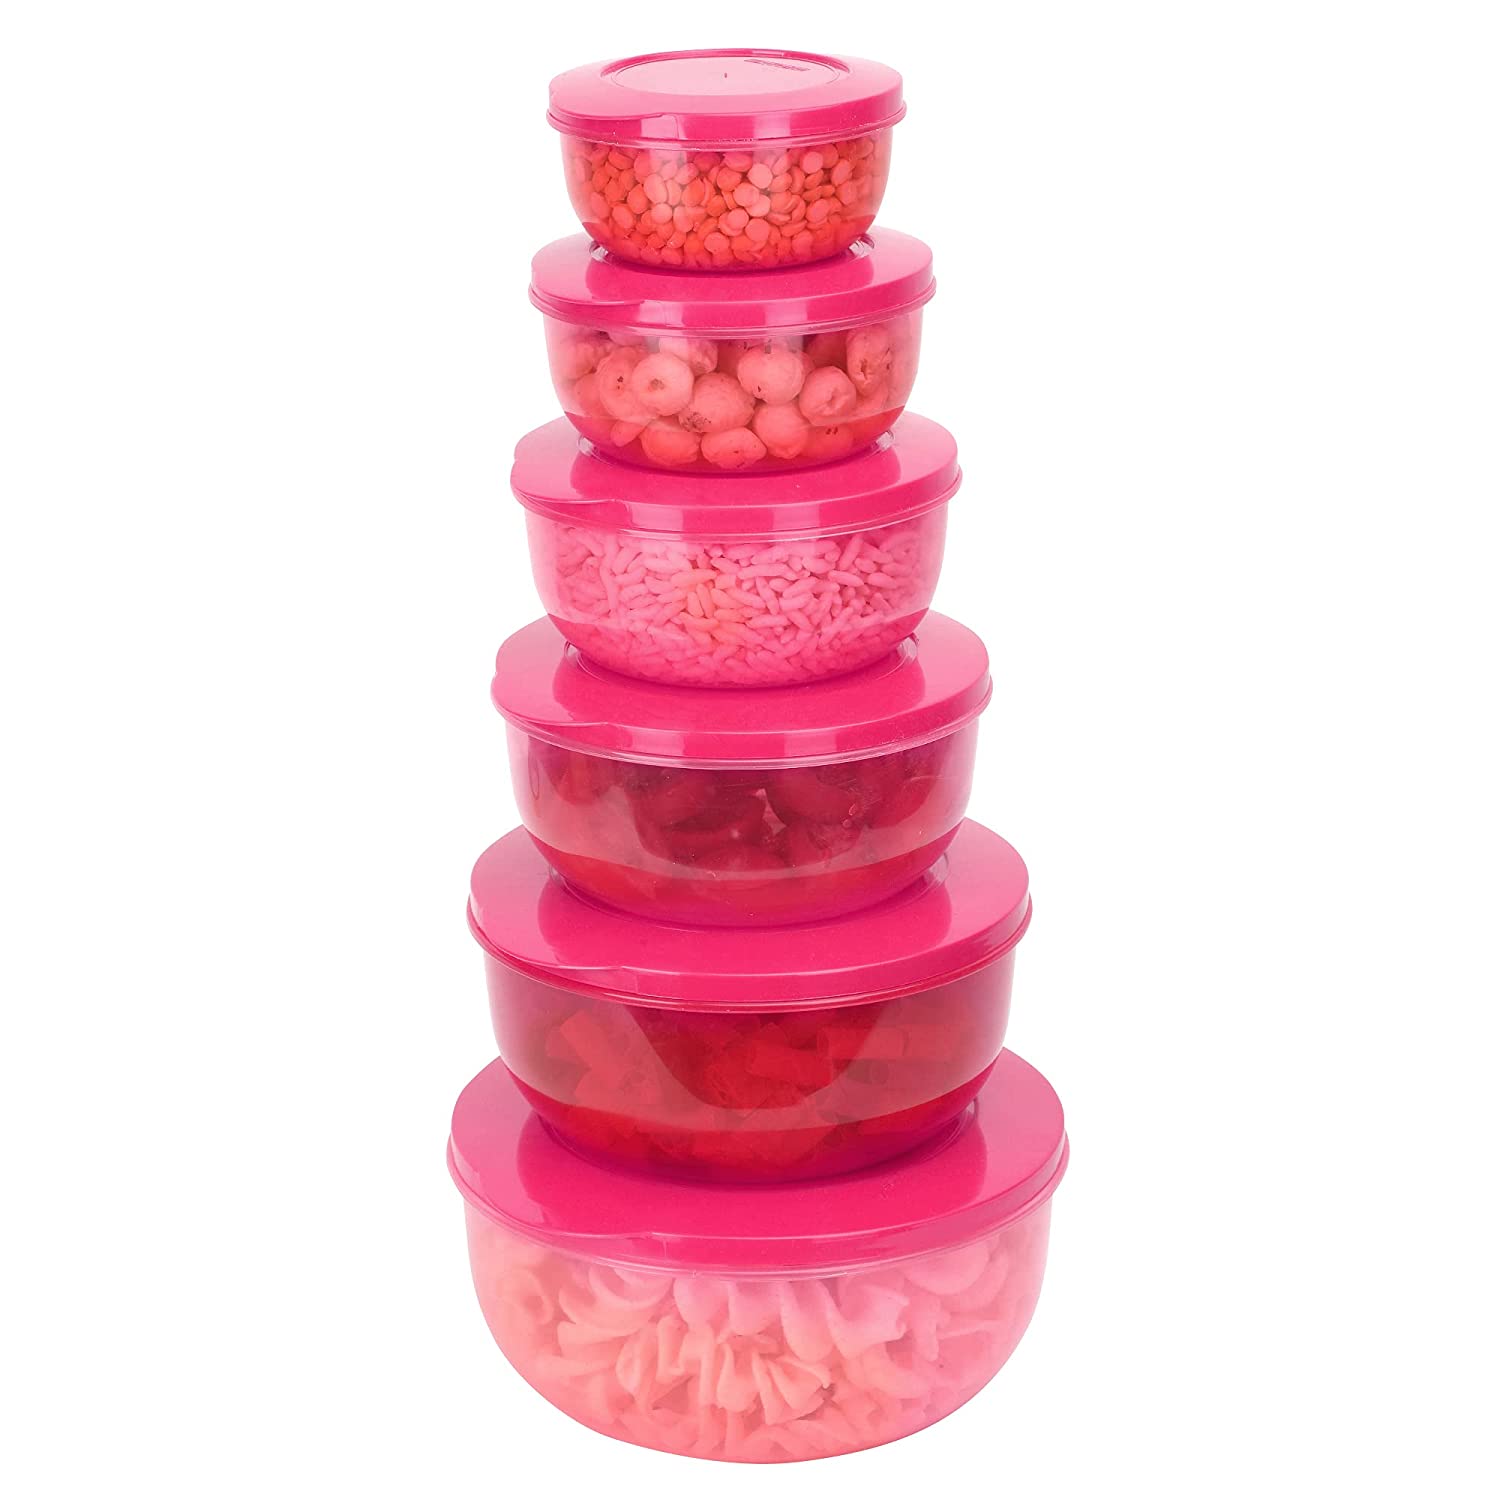 Cutting EDGE Eco-Storage Plastic Container & Organizer Set for Kitchen, Refrigerator & Home Use